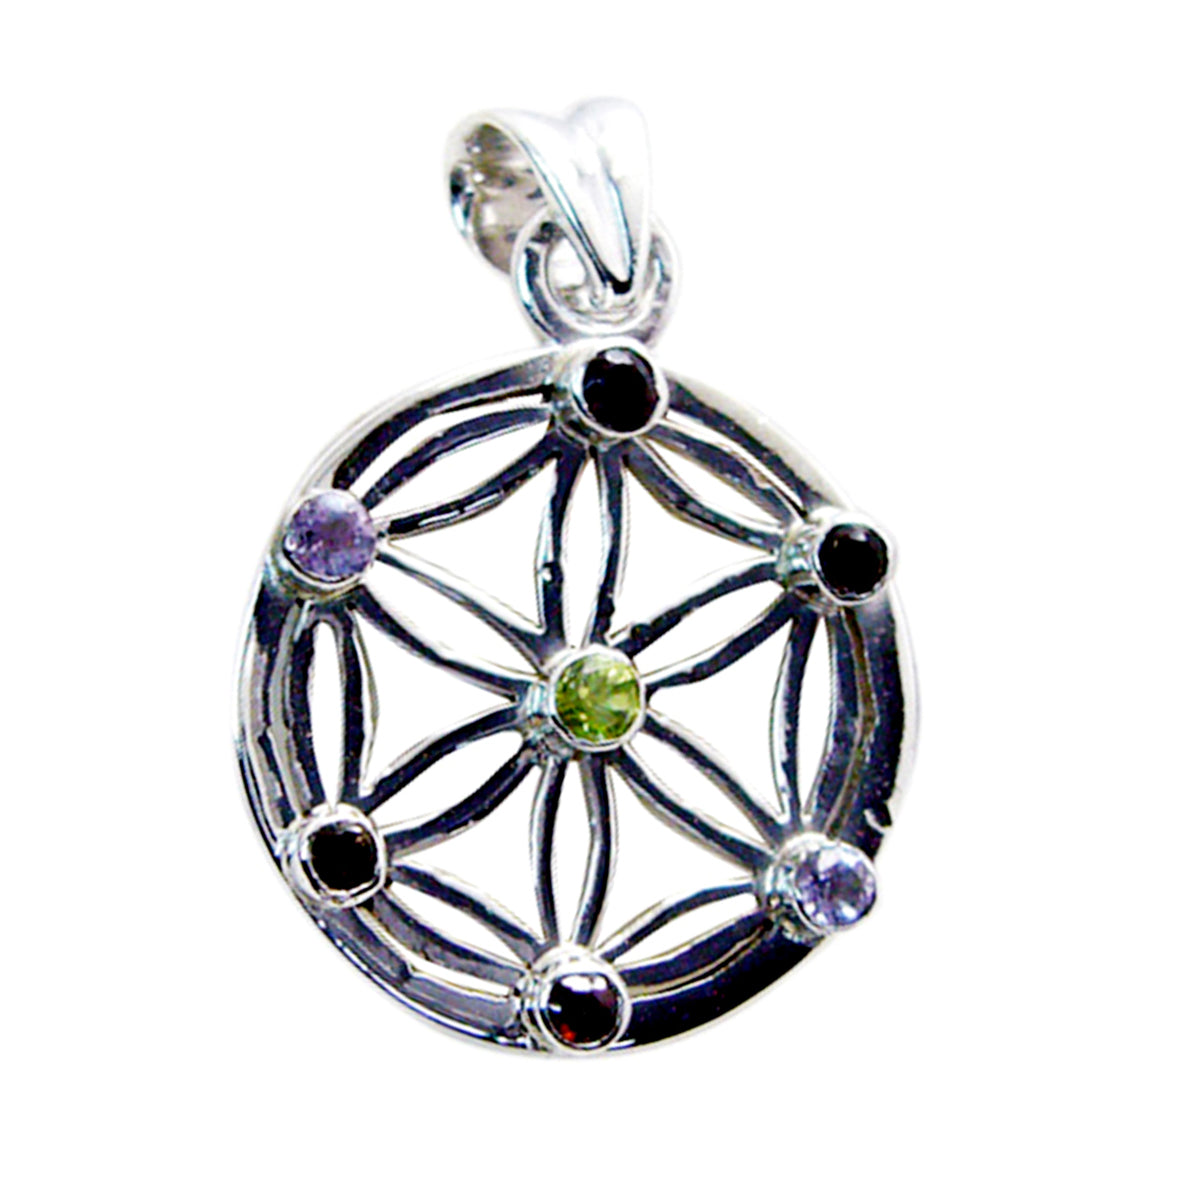 Riyo Alluring Gemstone Round Faceted Multi Color Multi Stone 1021 Sterling Silver Pendant Gift For Birthday